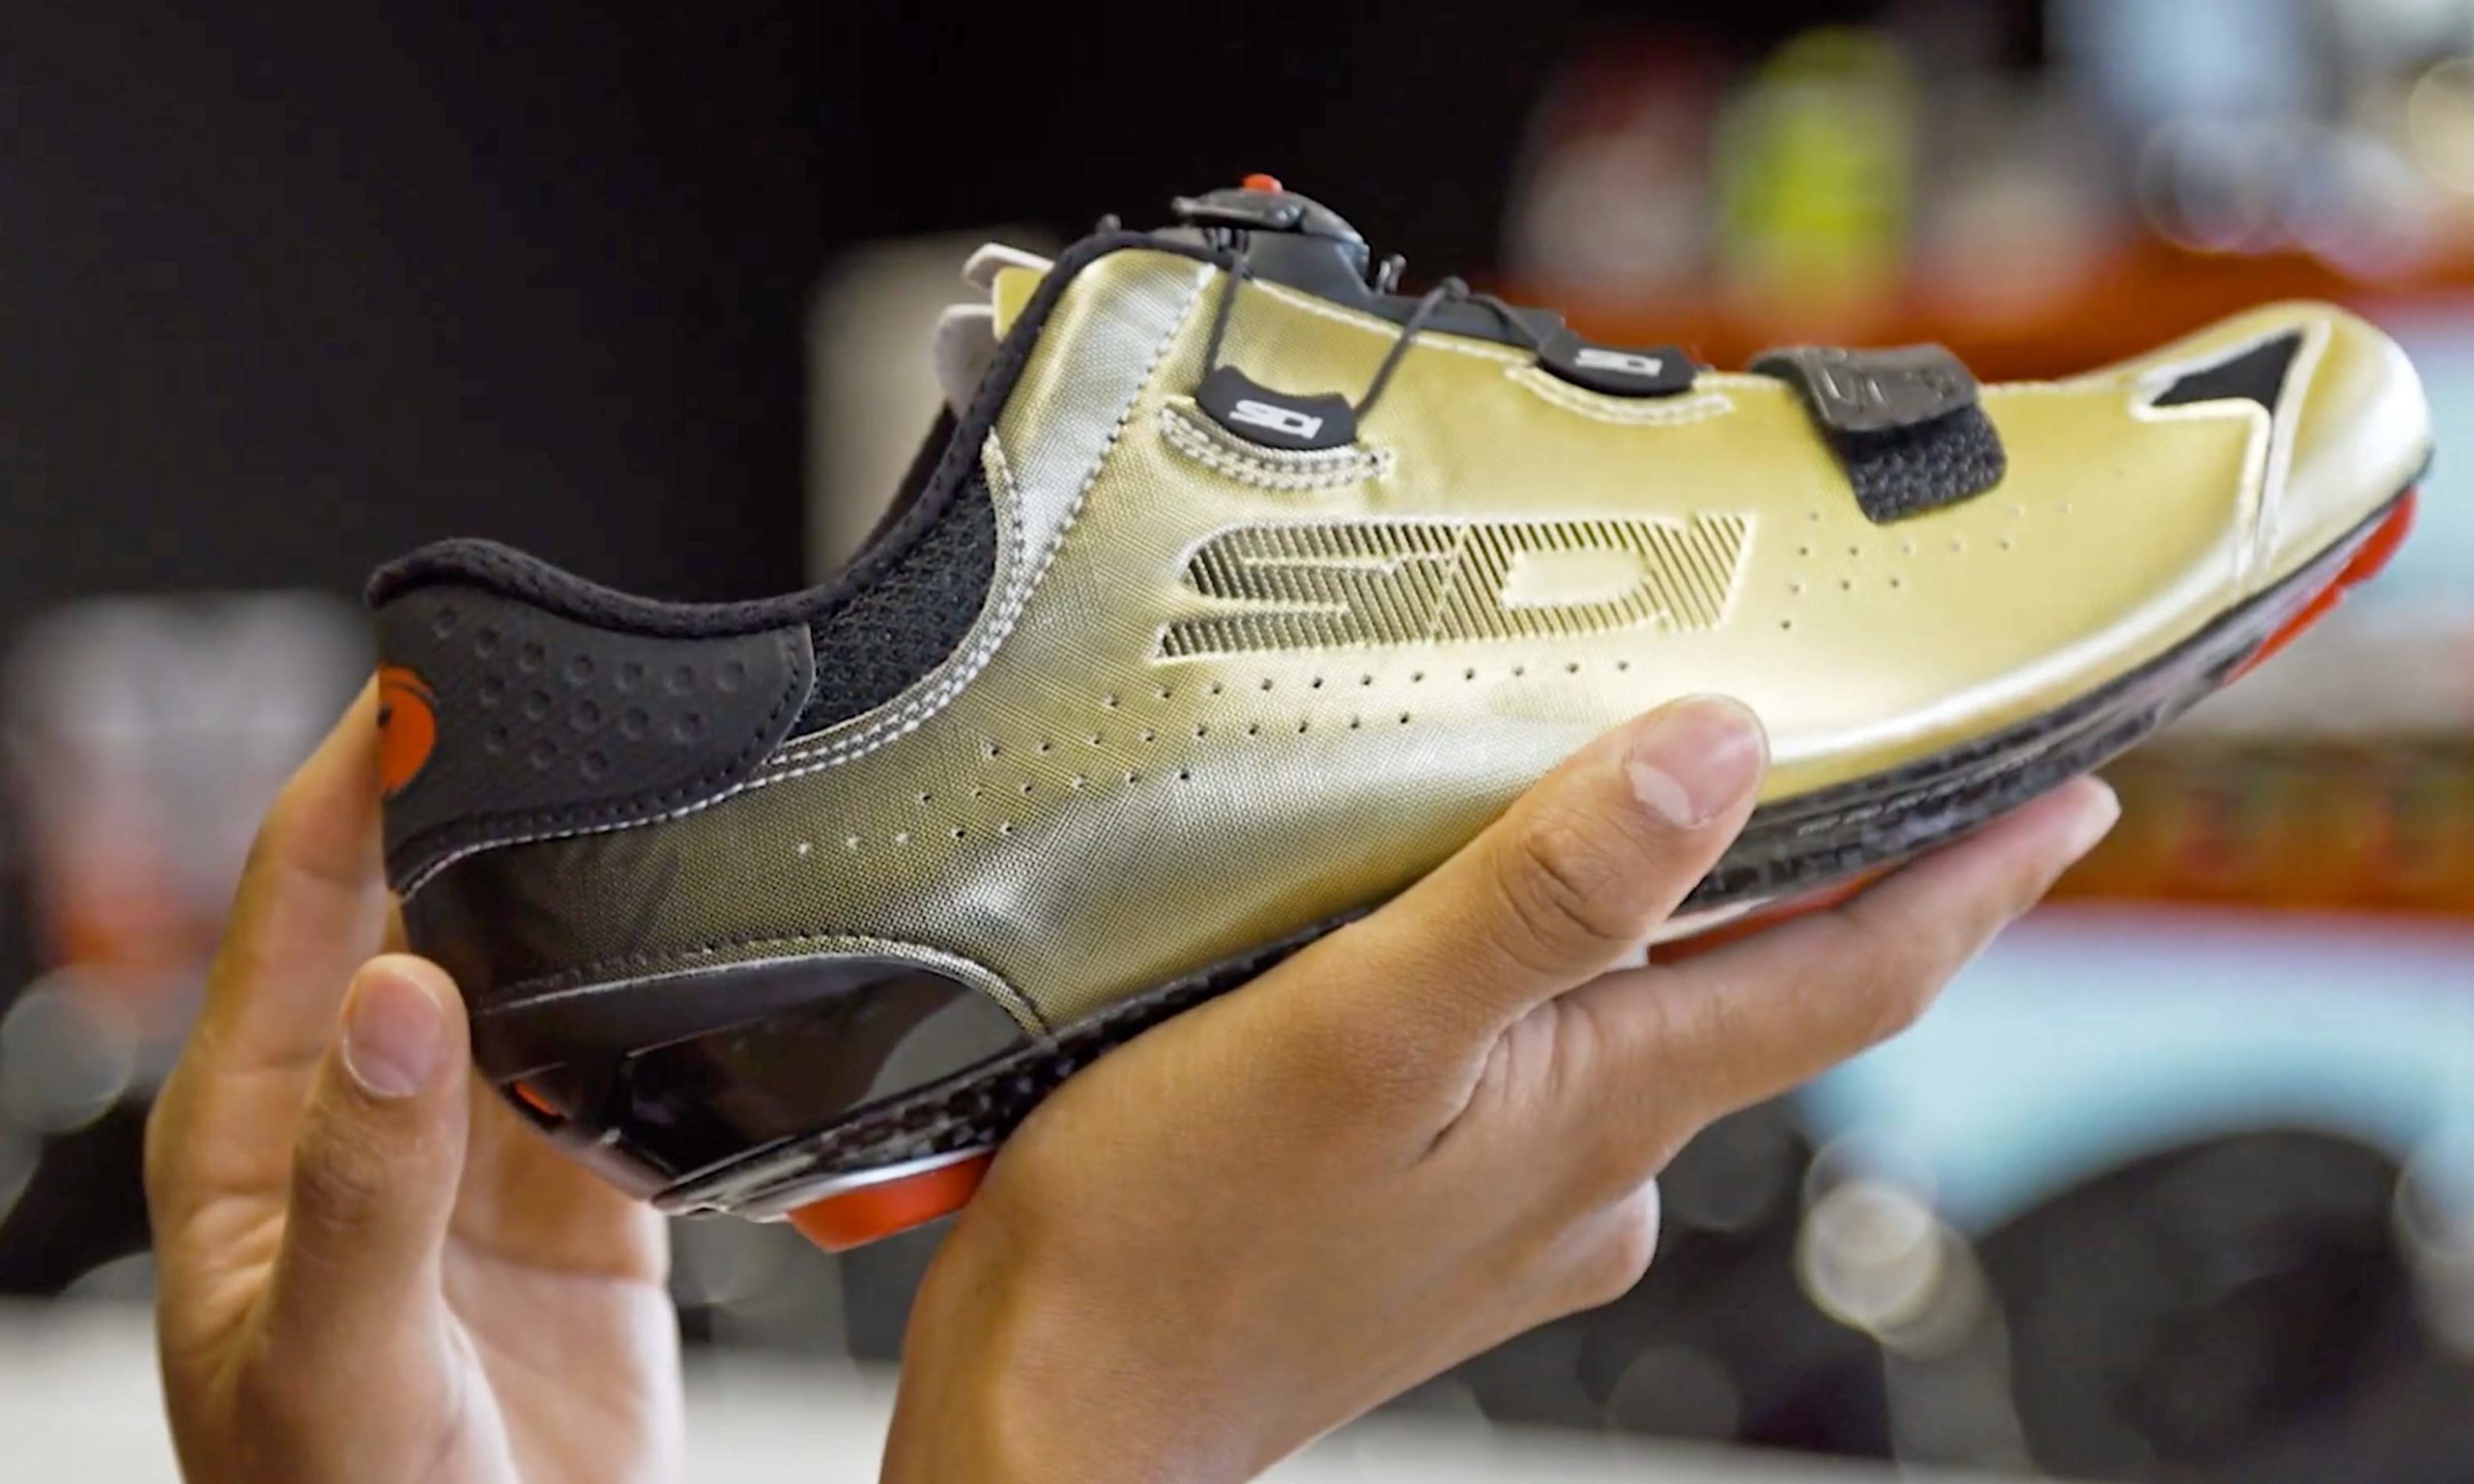 Sidi Sixty Gold limited edition carbon road cycling shoes, Egan Bernal